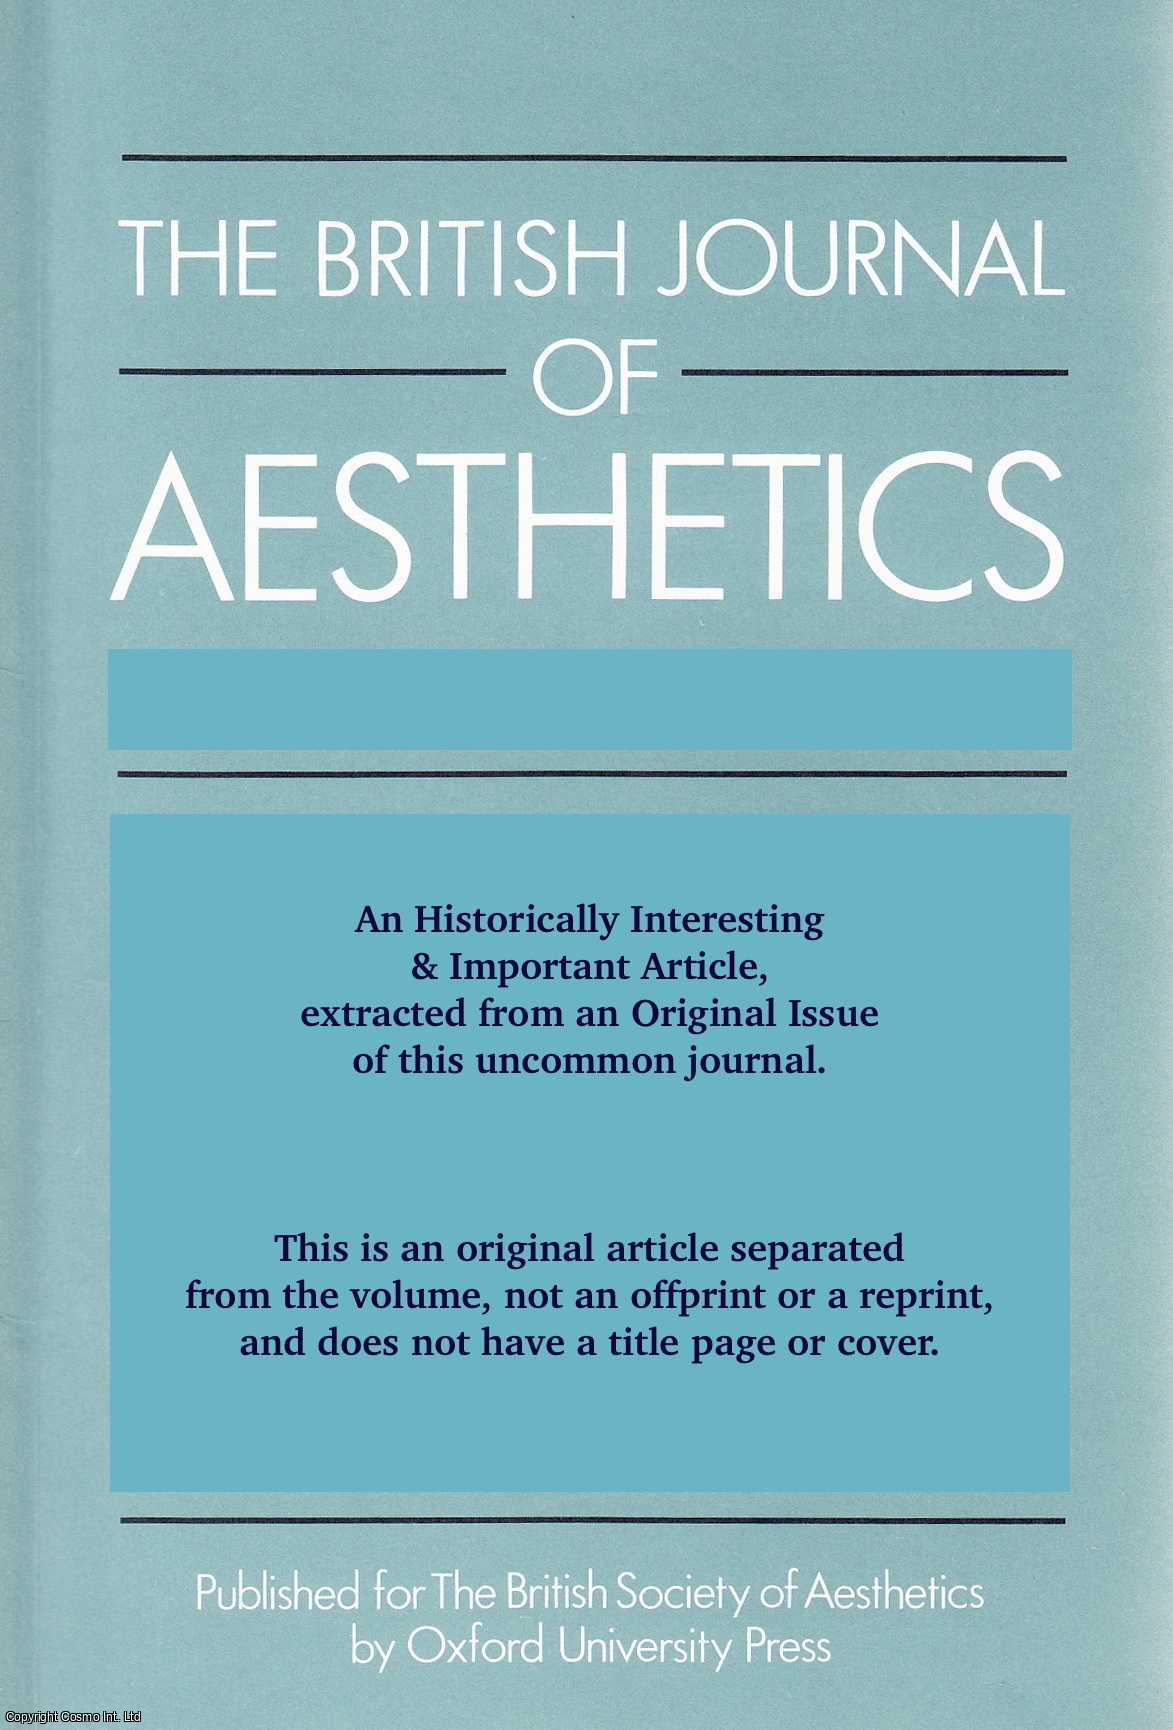 Timothy W. Bartel - Appreciation and Dickie's Definition of Art. An original article from the British Journal of Aesthetics, 1979.